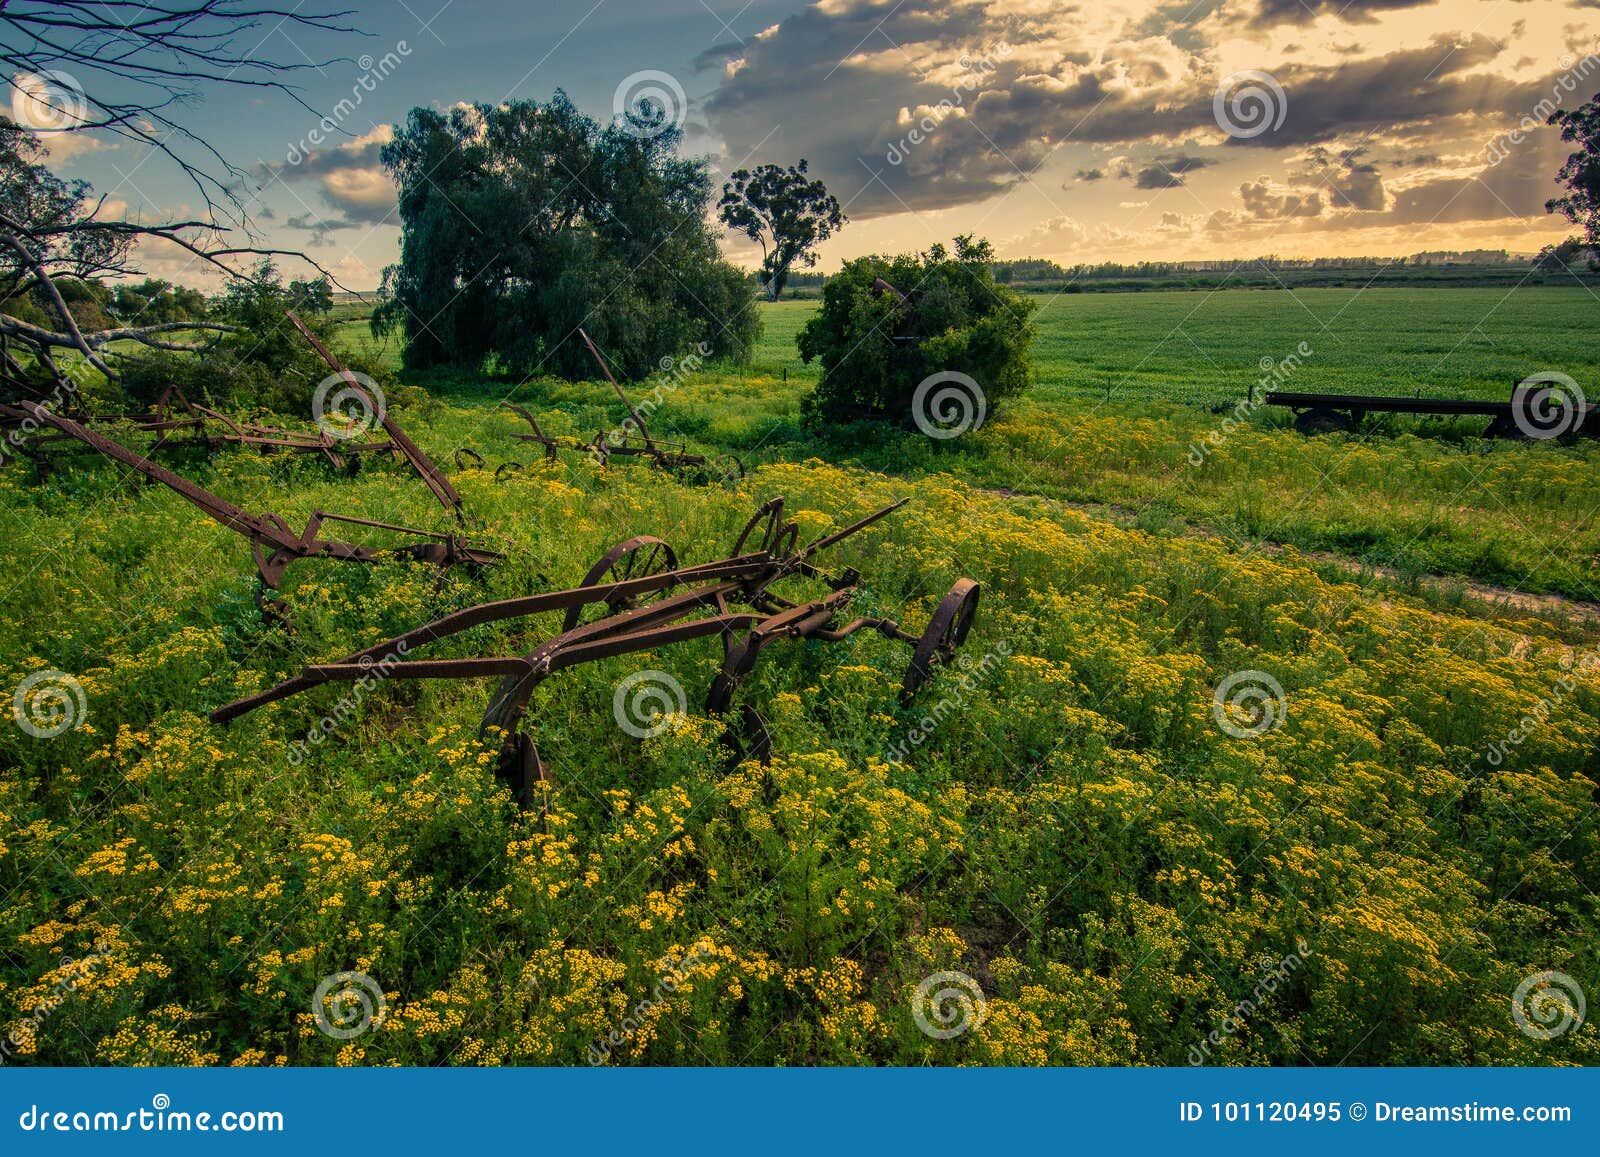 an old farm implement rusts in the field at a farm in south africa